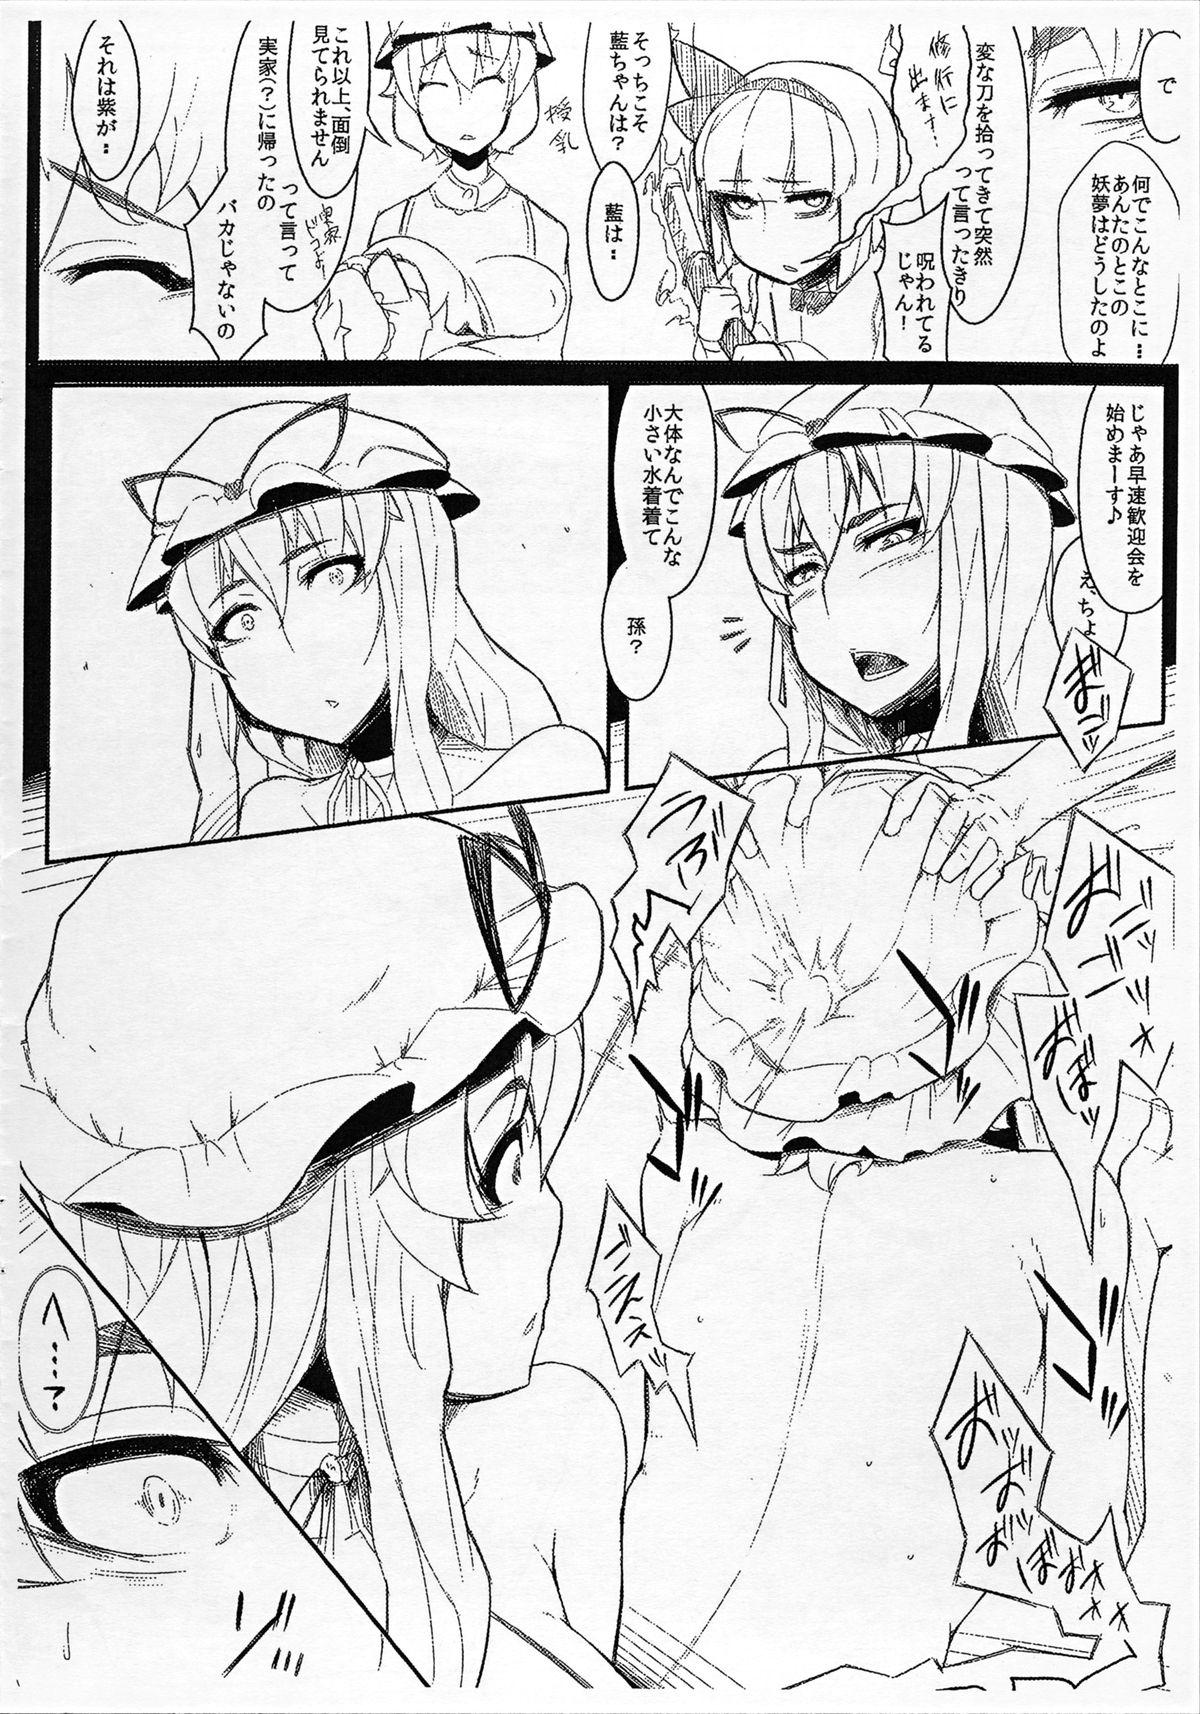 Squirting Toshimaen e Youkoso Vol. 0 - Touhou project Stepdad - Page 3